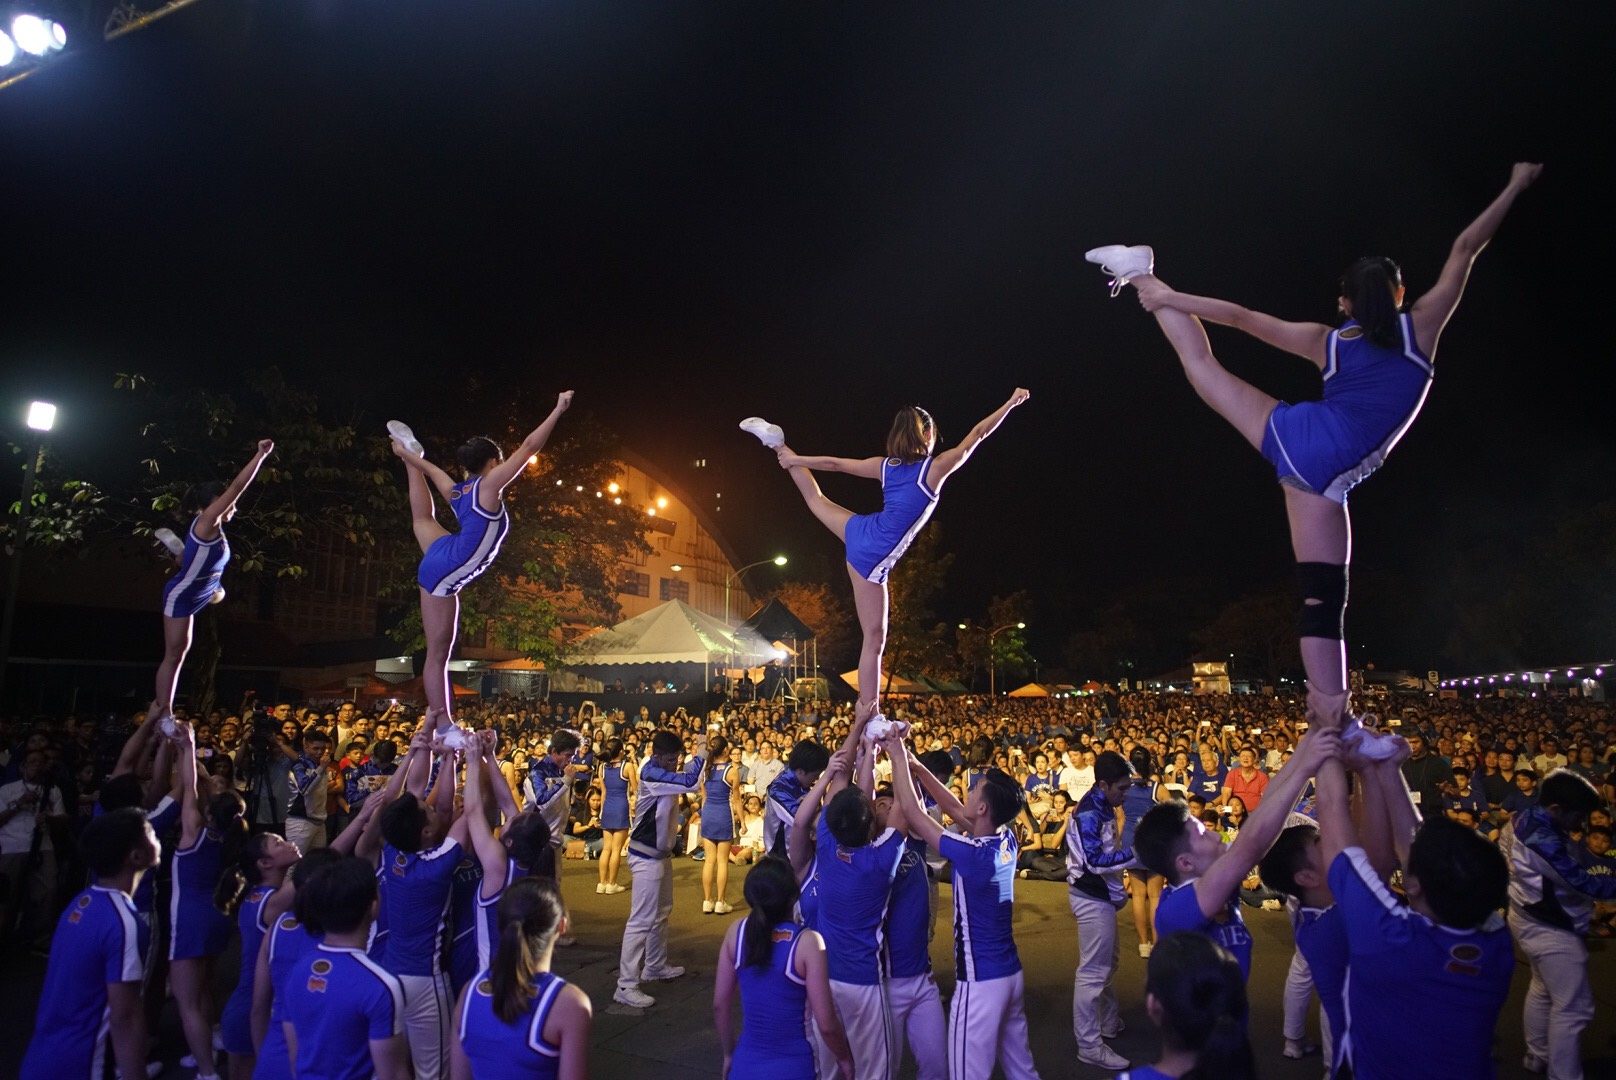 CHEERS. The Ateneo Blue Babble Battalion performs in front of the crowd. Photo by Martin San Diego/Rappler 